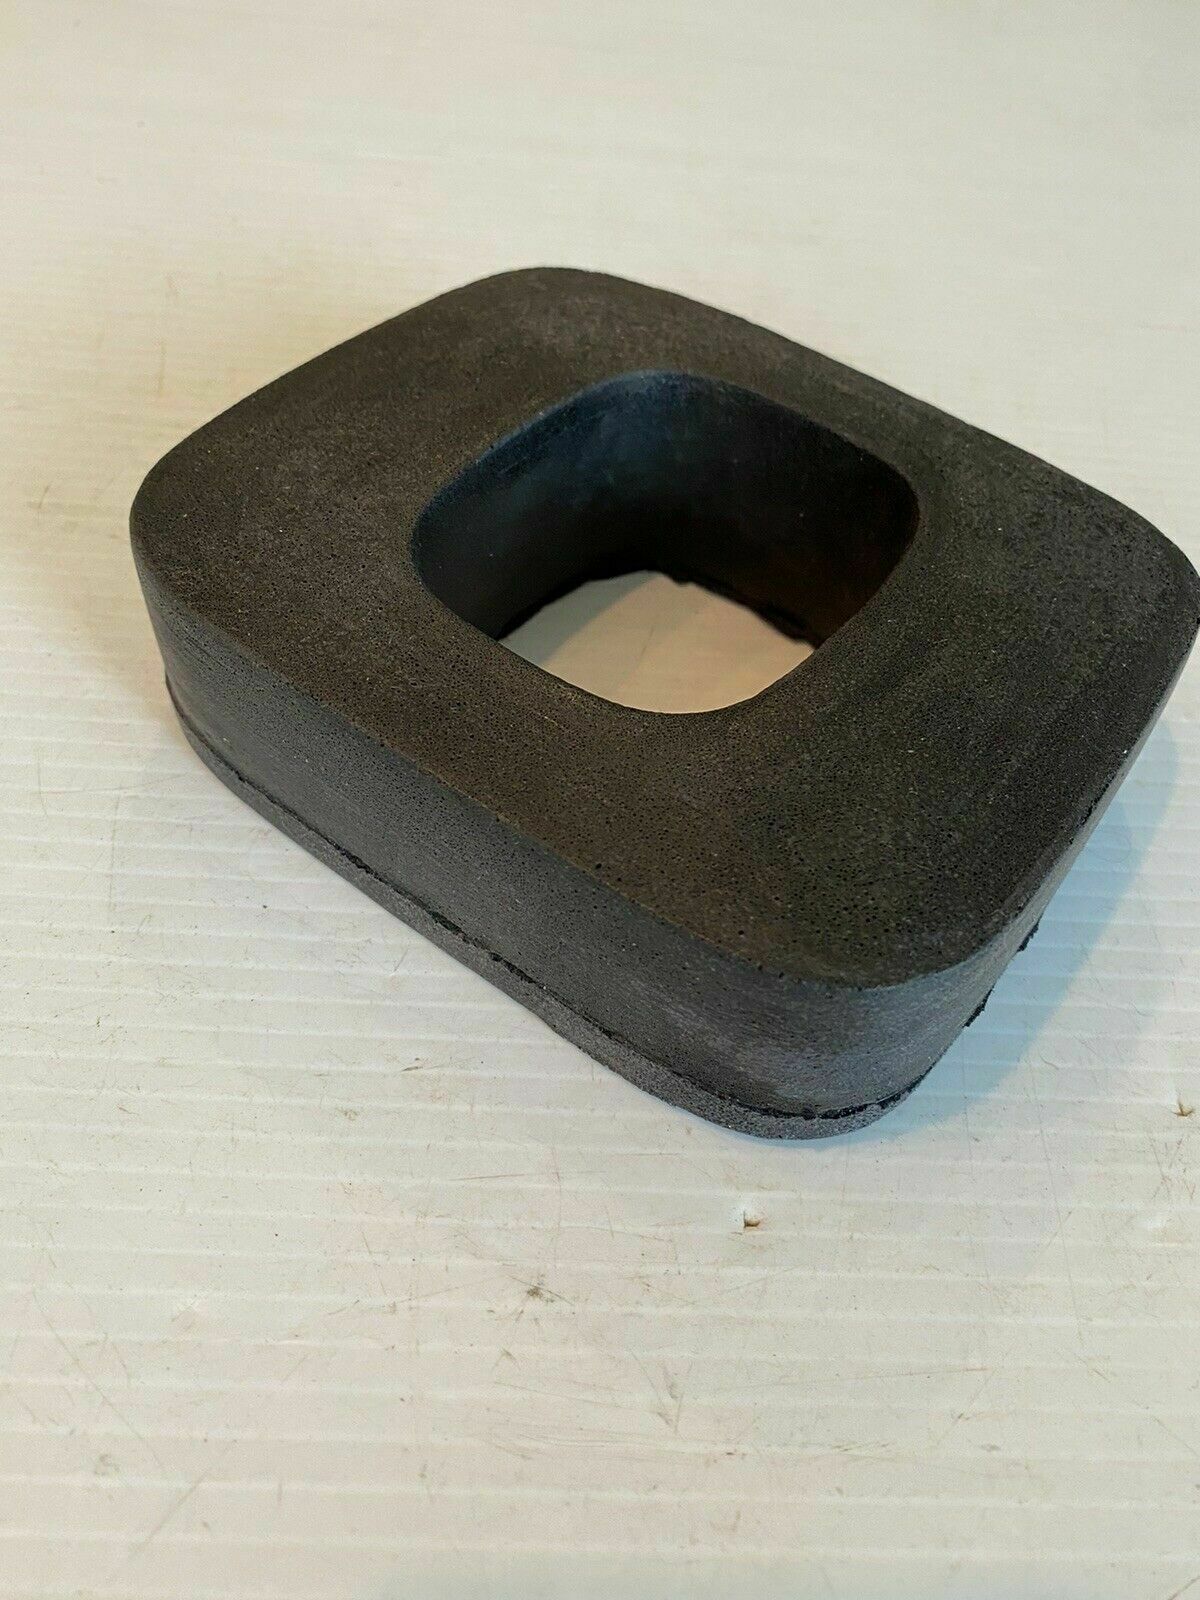 Gaskets: OEM 1947-1955 First Chevy GMC Truck 4 speed Floor Shift Closed Cell Foam Mold